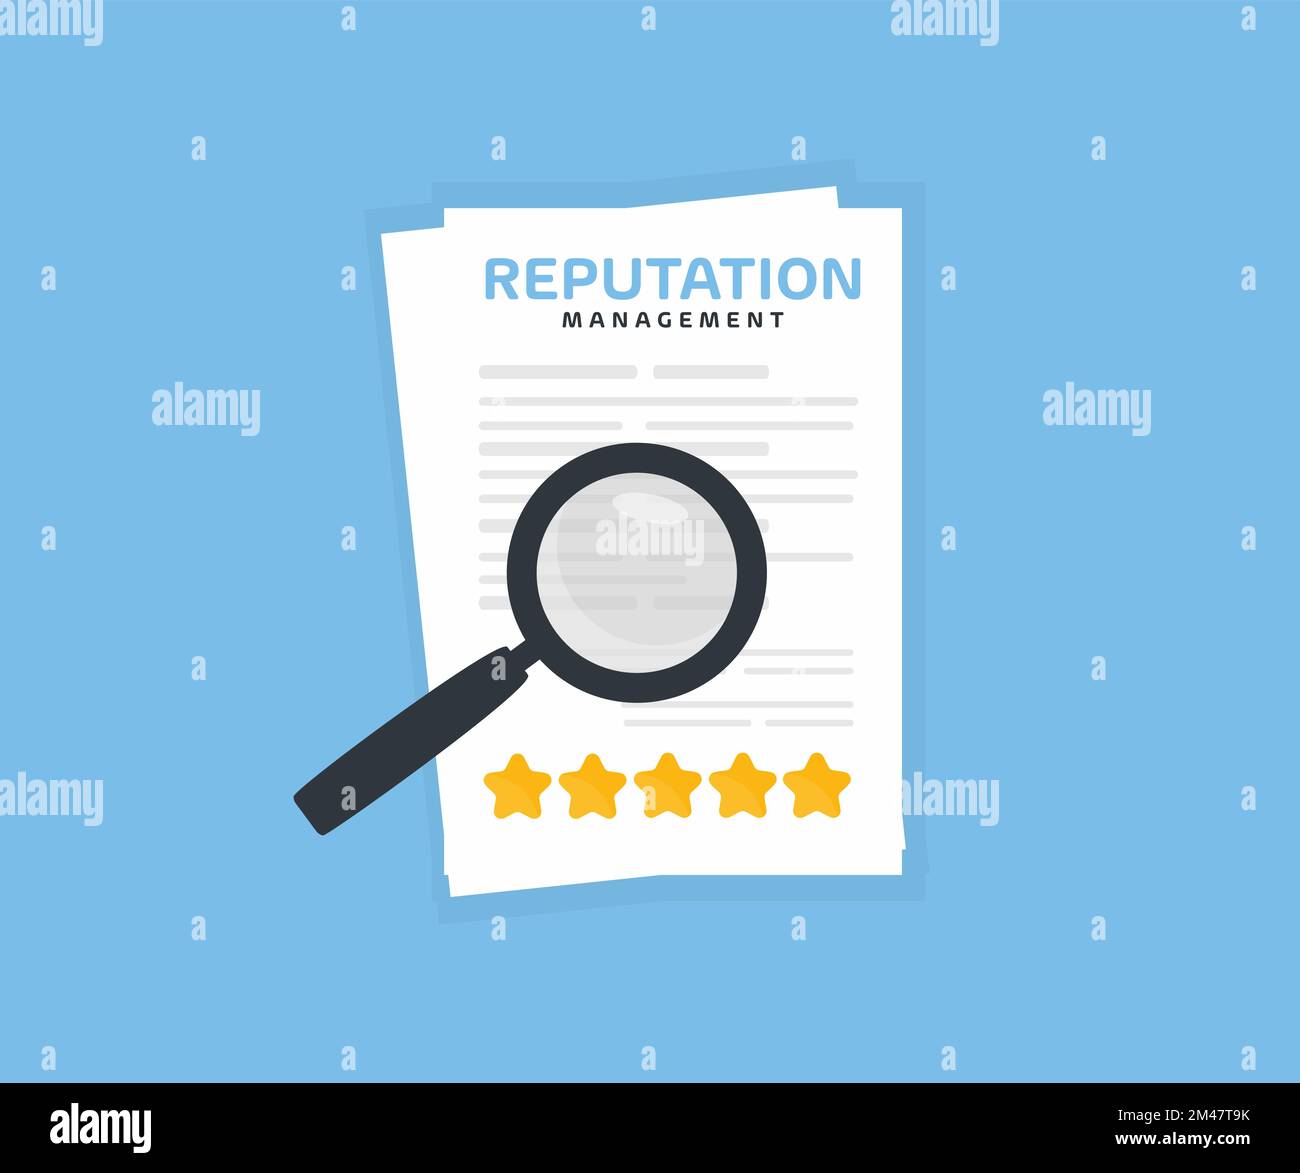 Online Reputation Management, Client Rating Document papers.  Business concept logo design. Analyze stars rating to increase satisfaction. Stock Vector